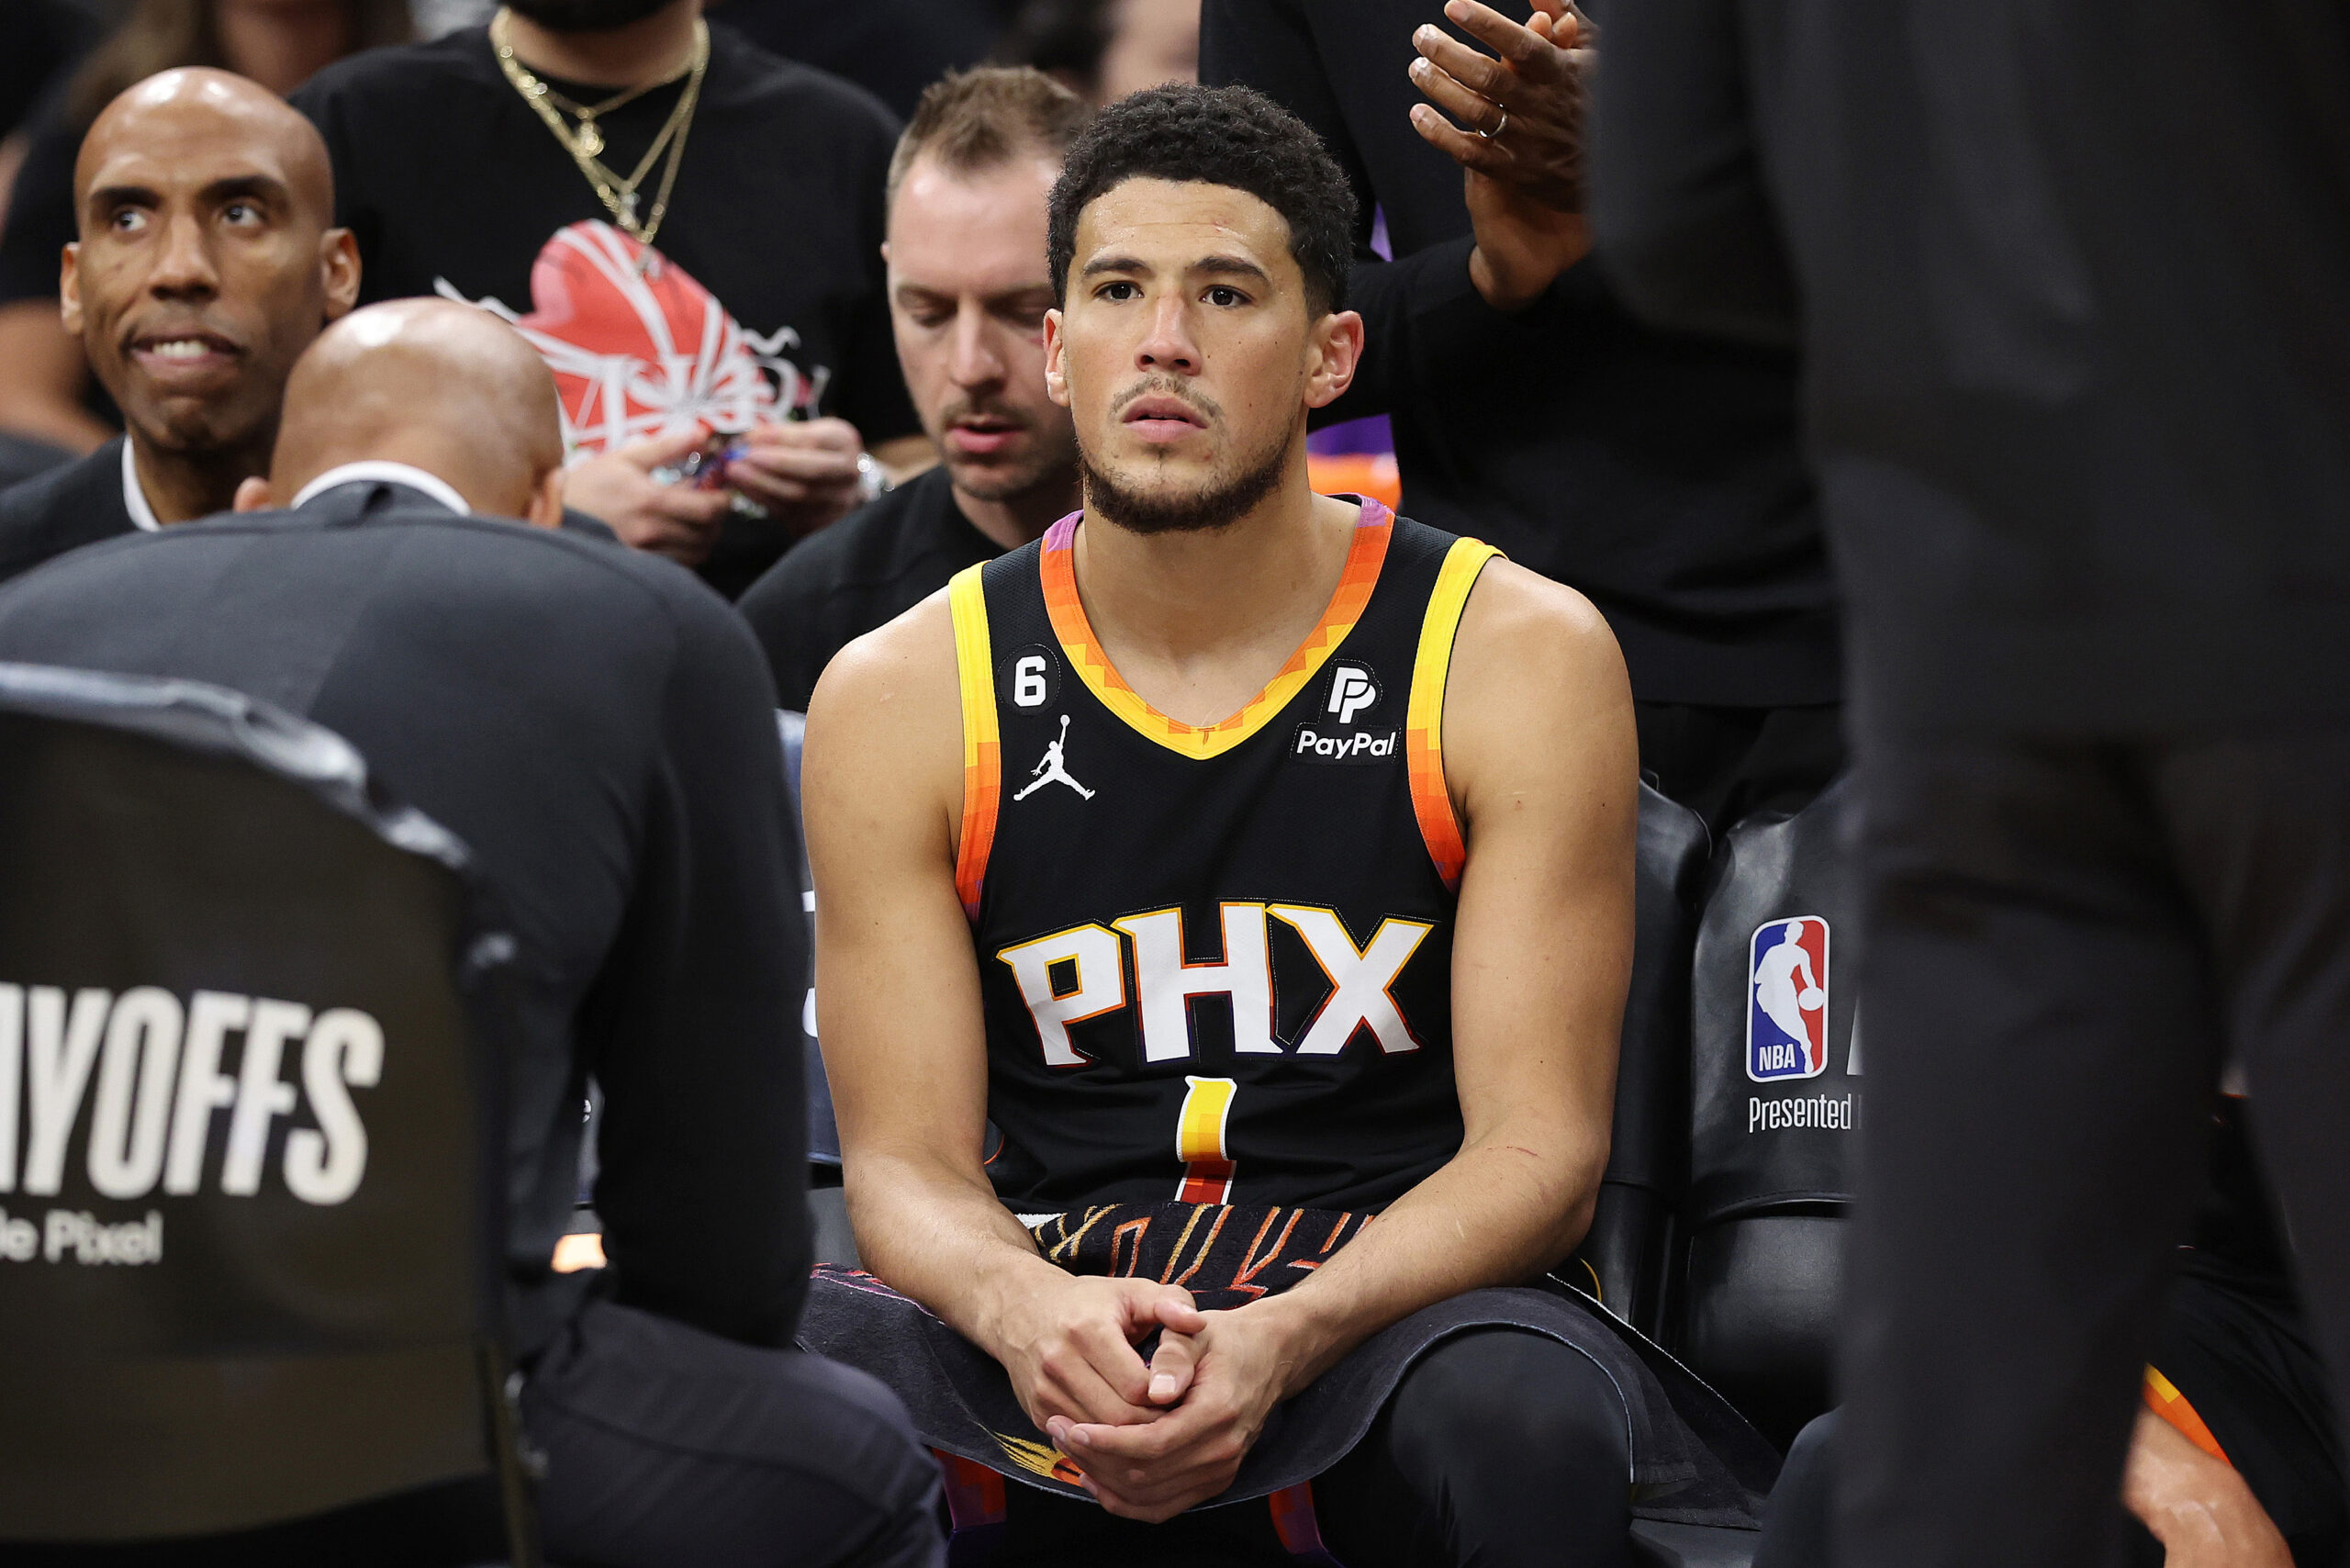 Devin Booker Surrounded By Bikini-Clad Women In New Yacht Photos